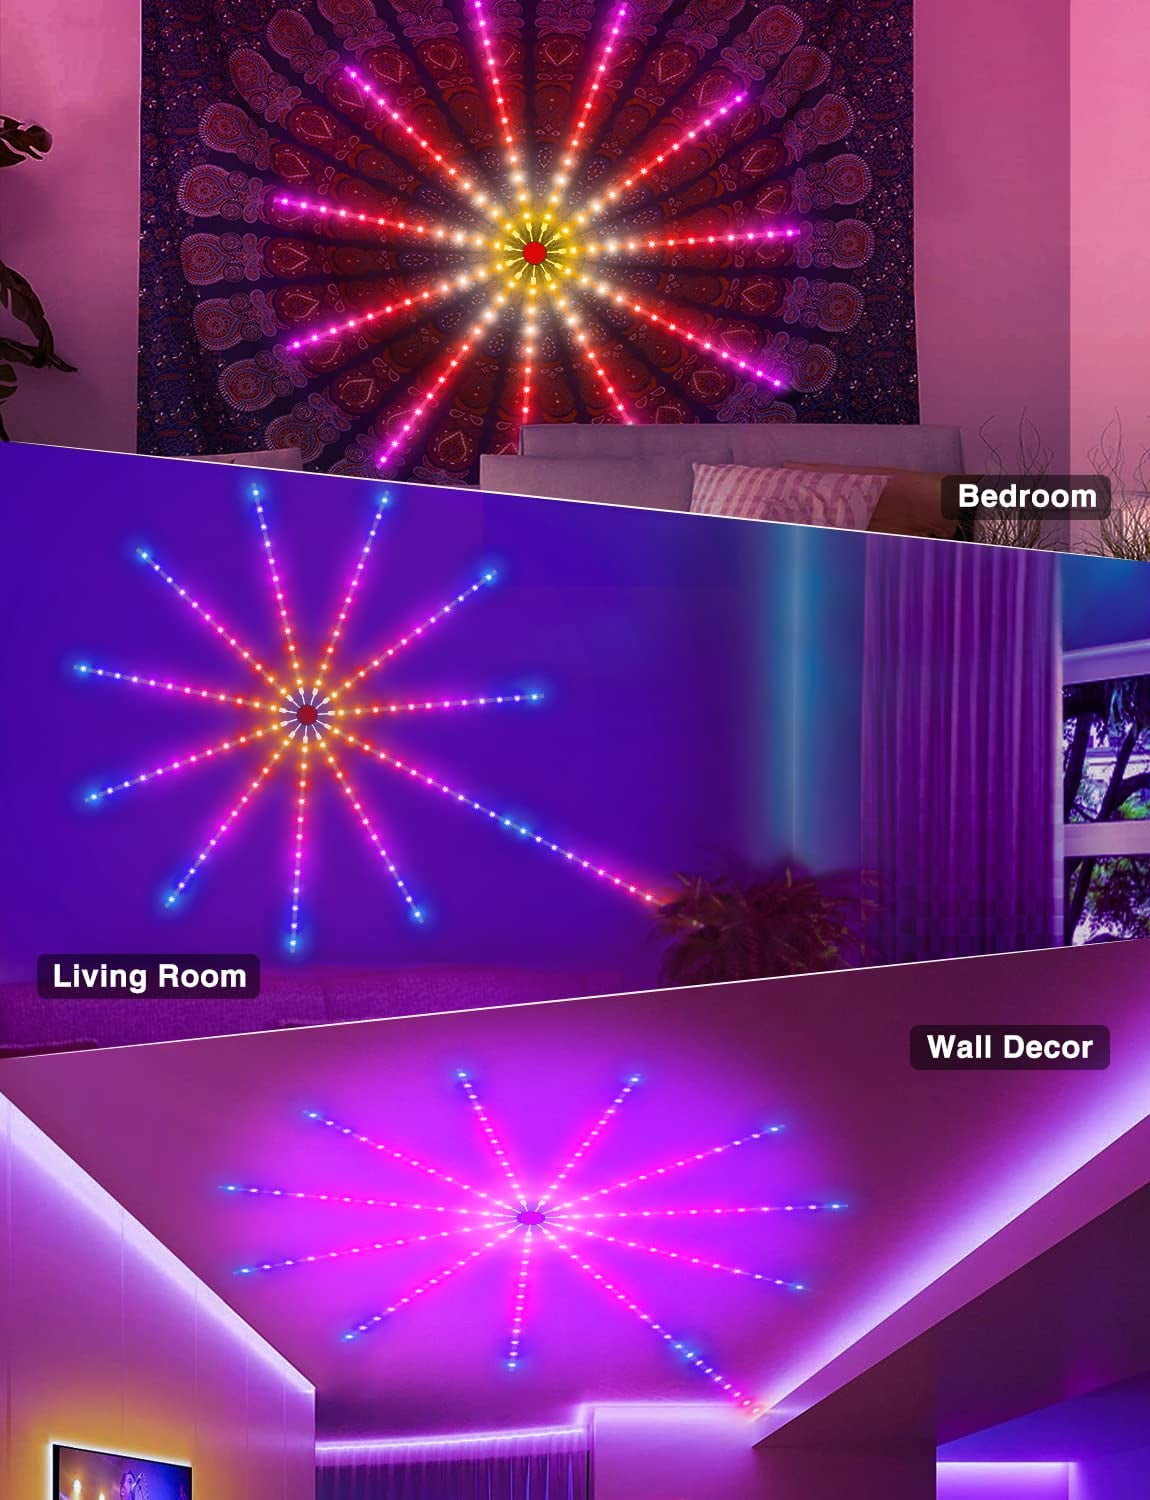 TzumiLED ColorWorks LED Lights, USB-powered Fireworks LED Light Strip with  Music Sync and Remote Control